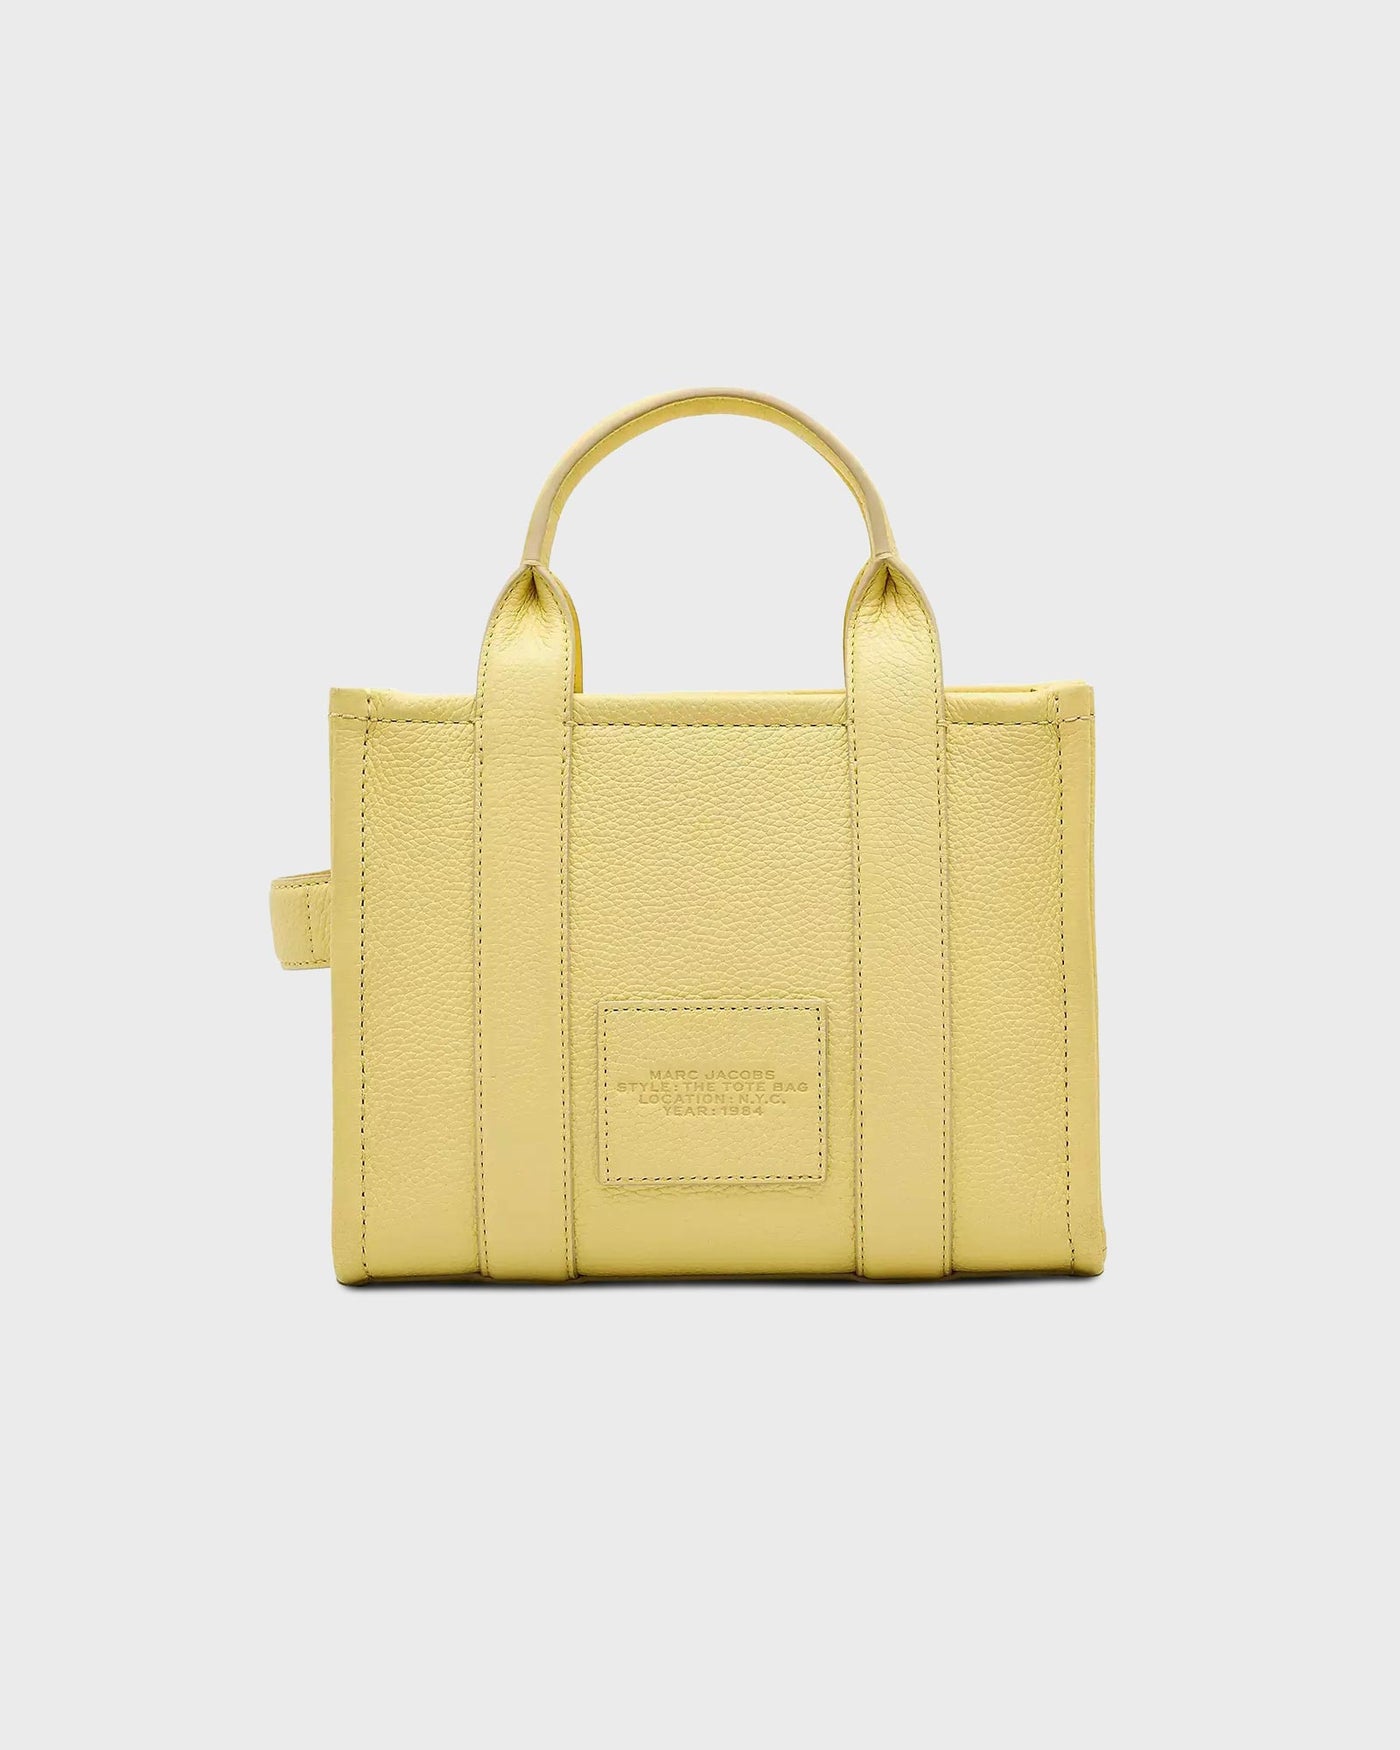 Marc Jacobs Tasche The Leather Small Tote Bag Custard myMEID